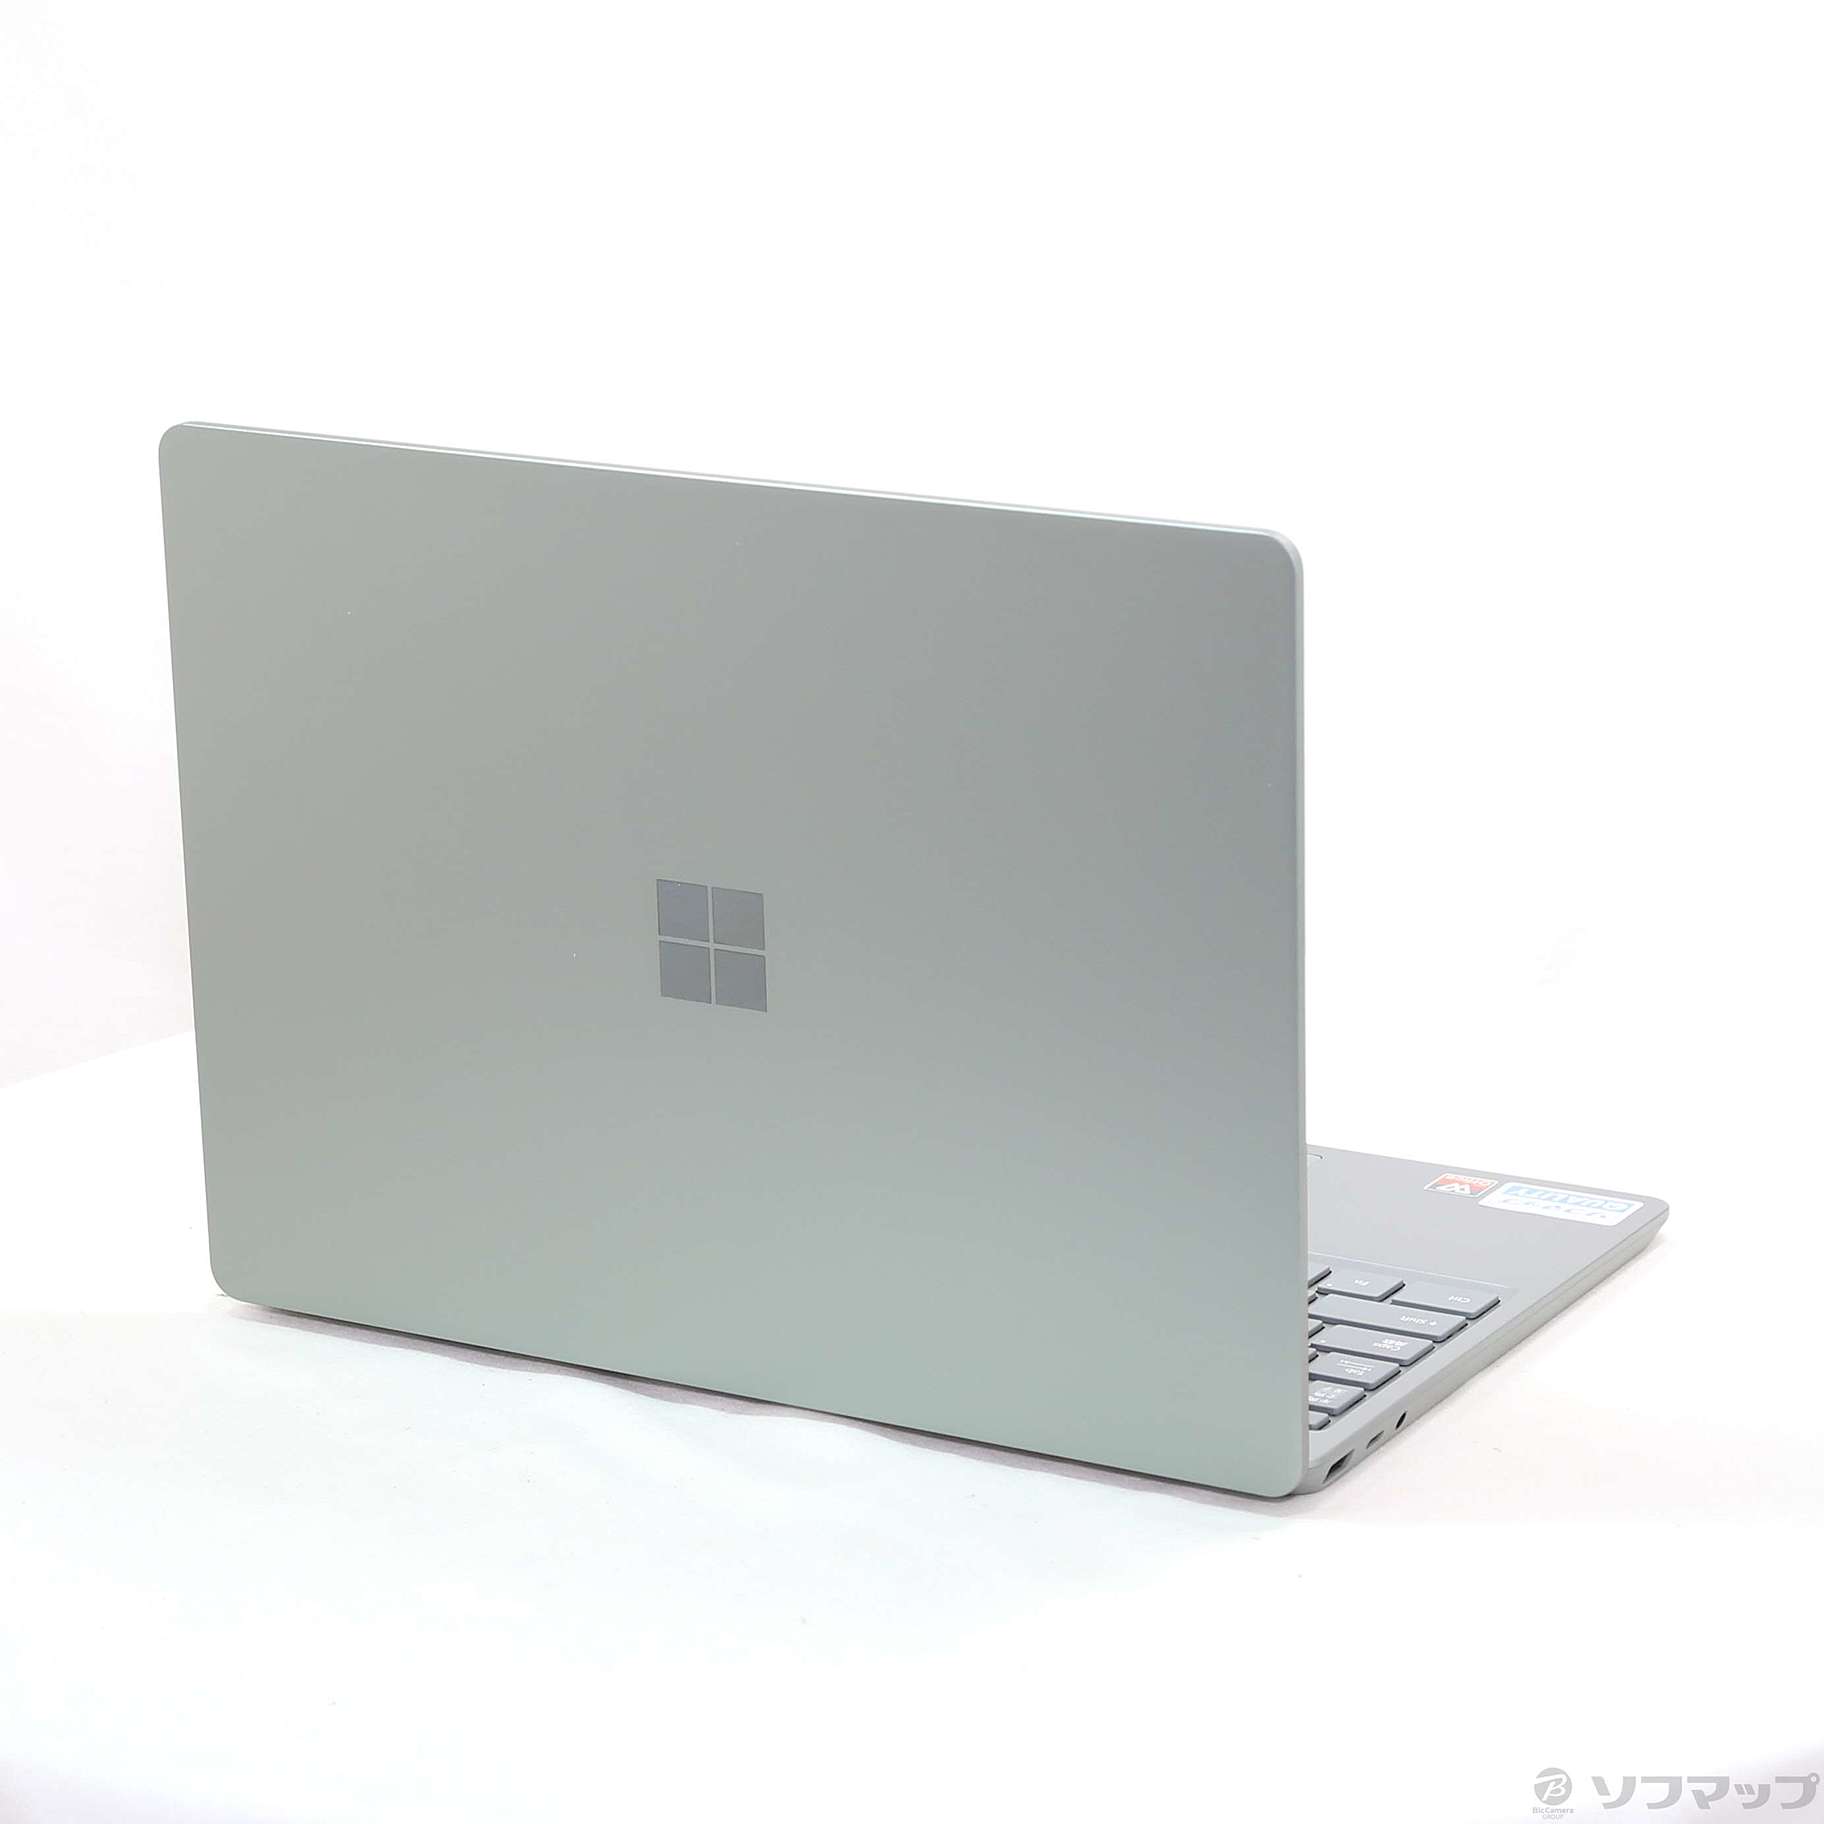 Surface Laptop Go 2 〔Core i5／8GB／SSD128GB〕 8QC-00032 セージ